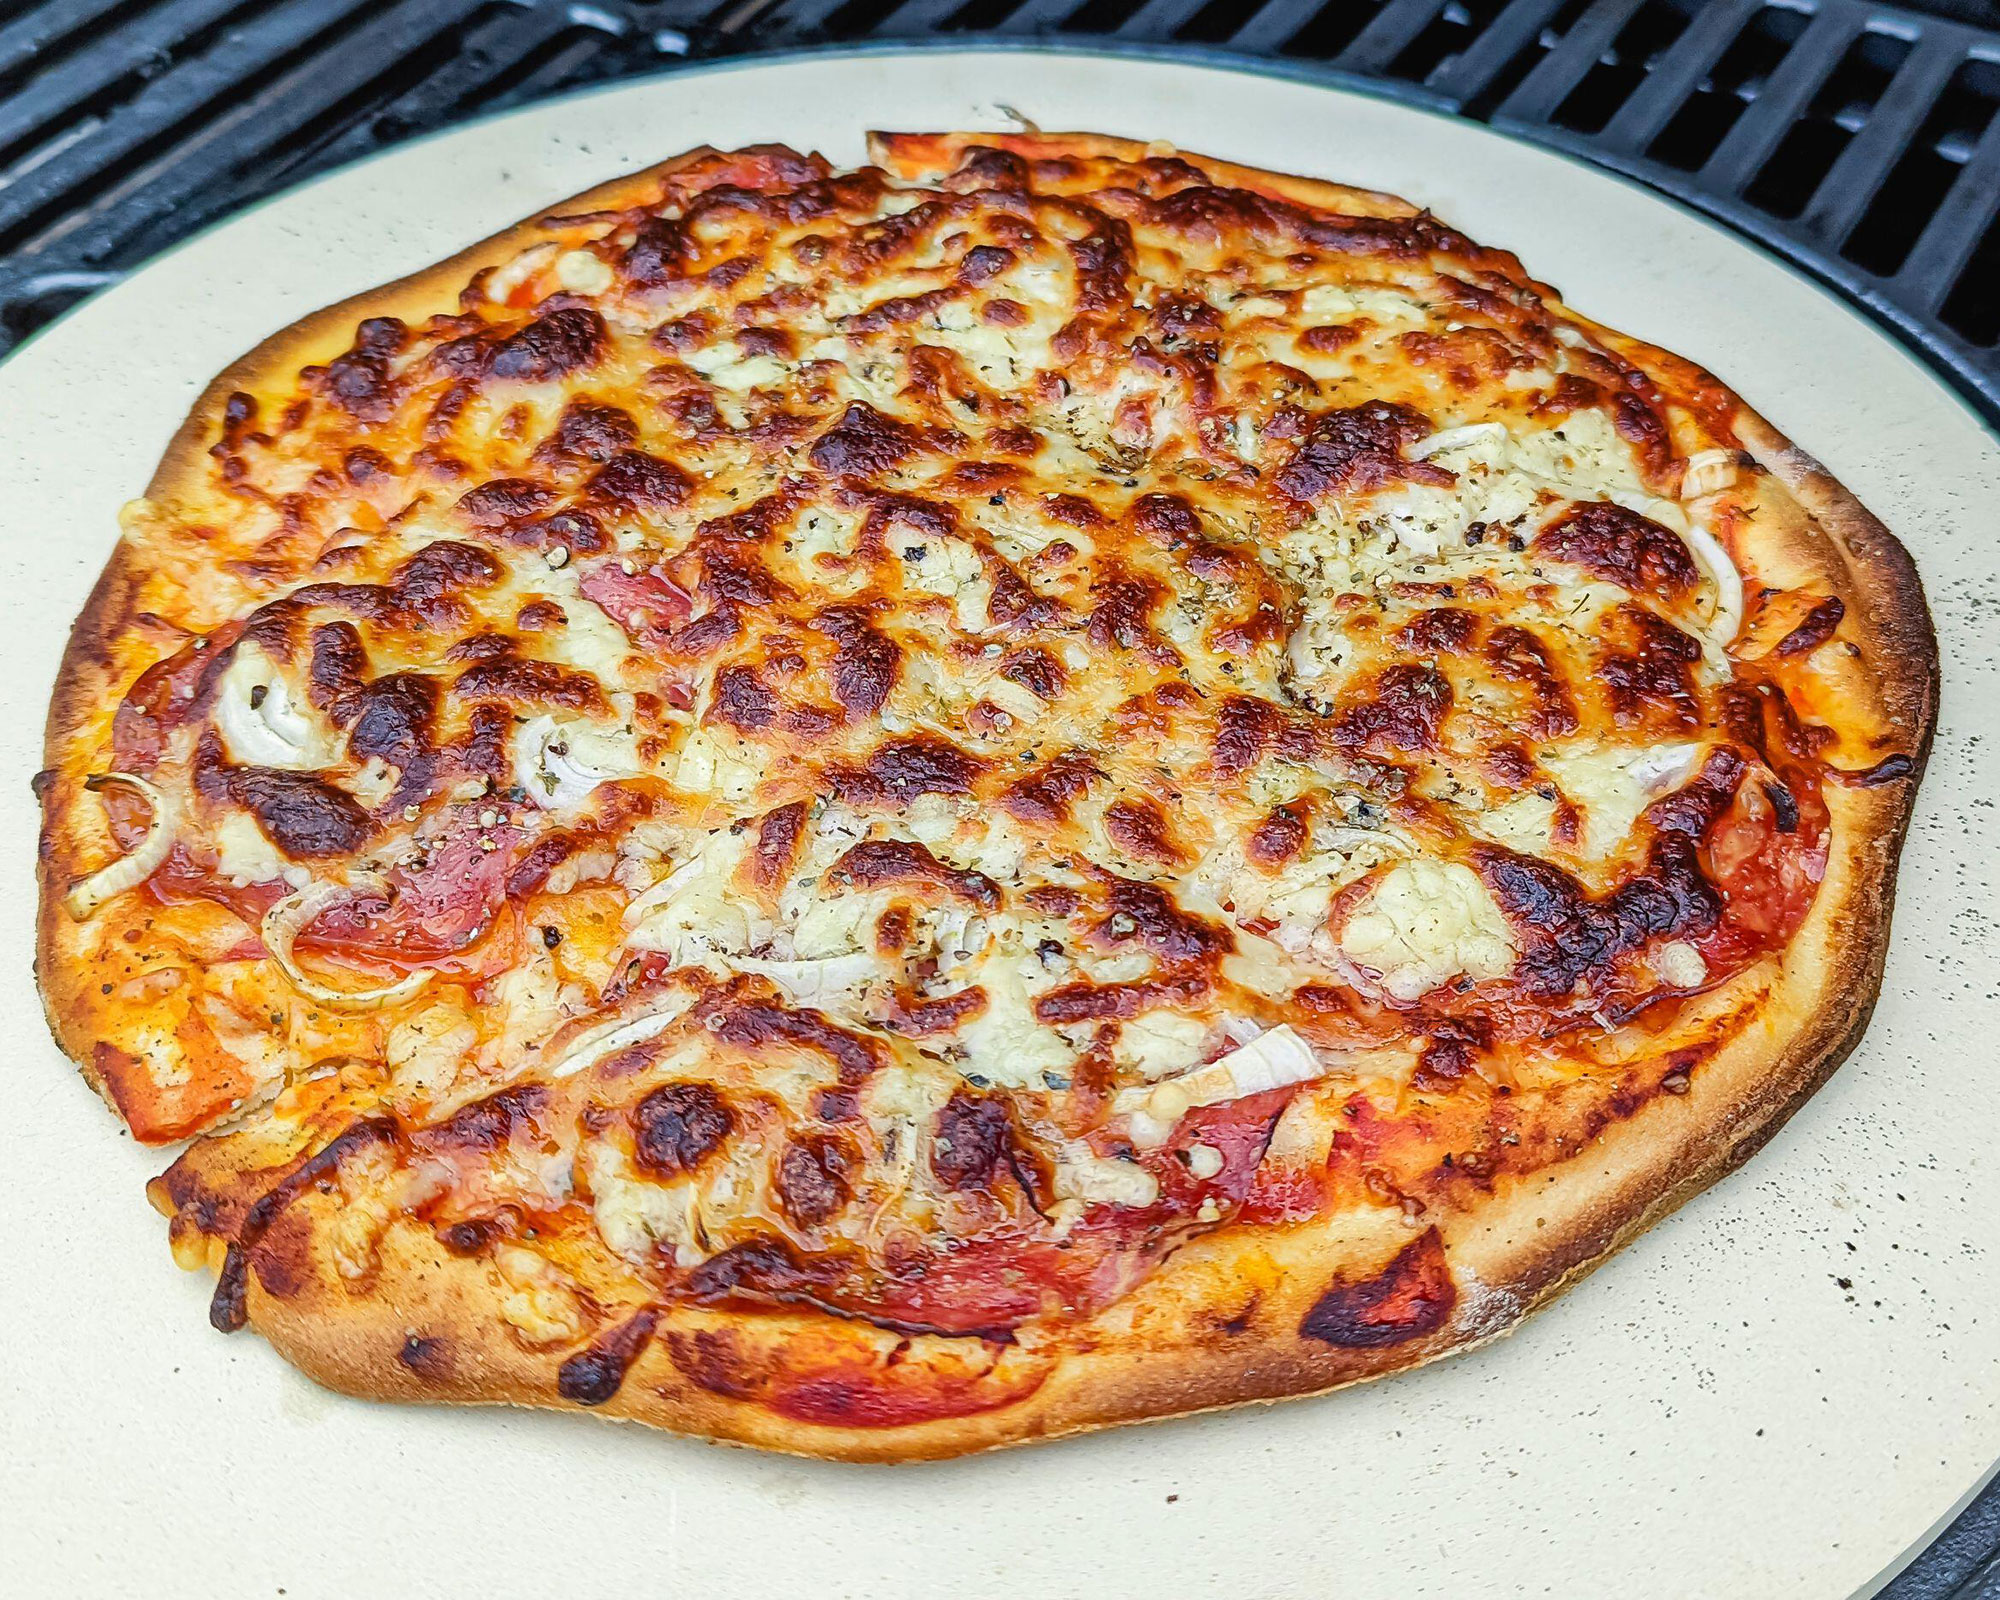 pizza cooking on a pizza stone over an outdoor grill